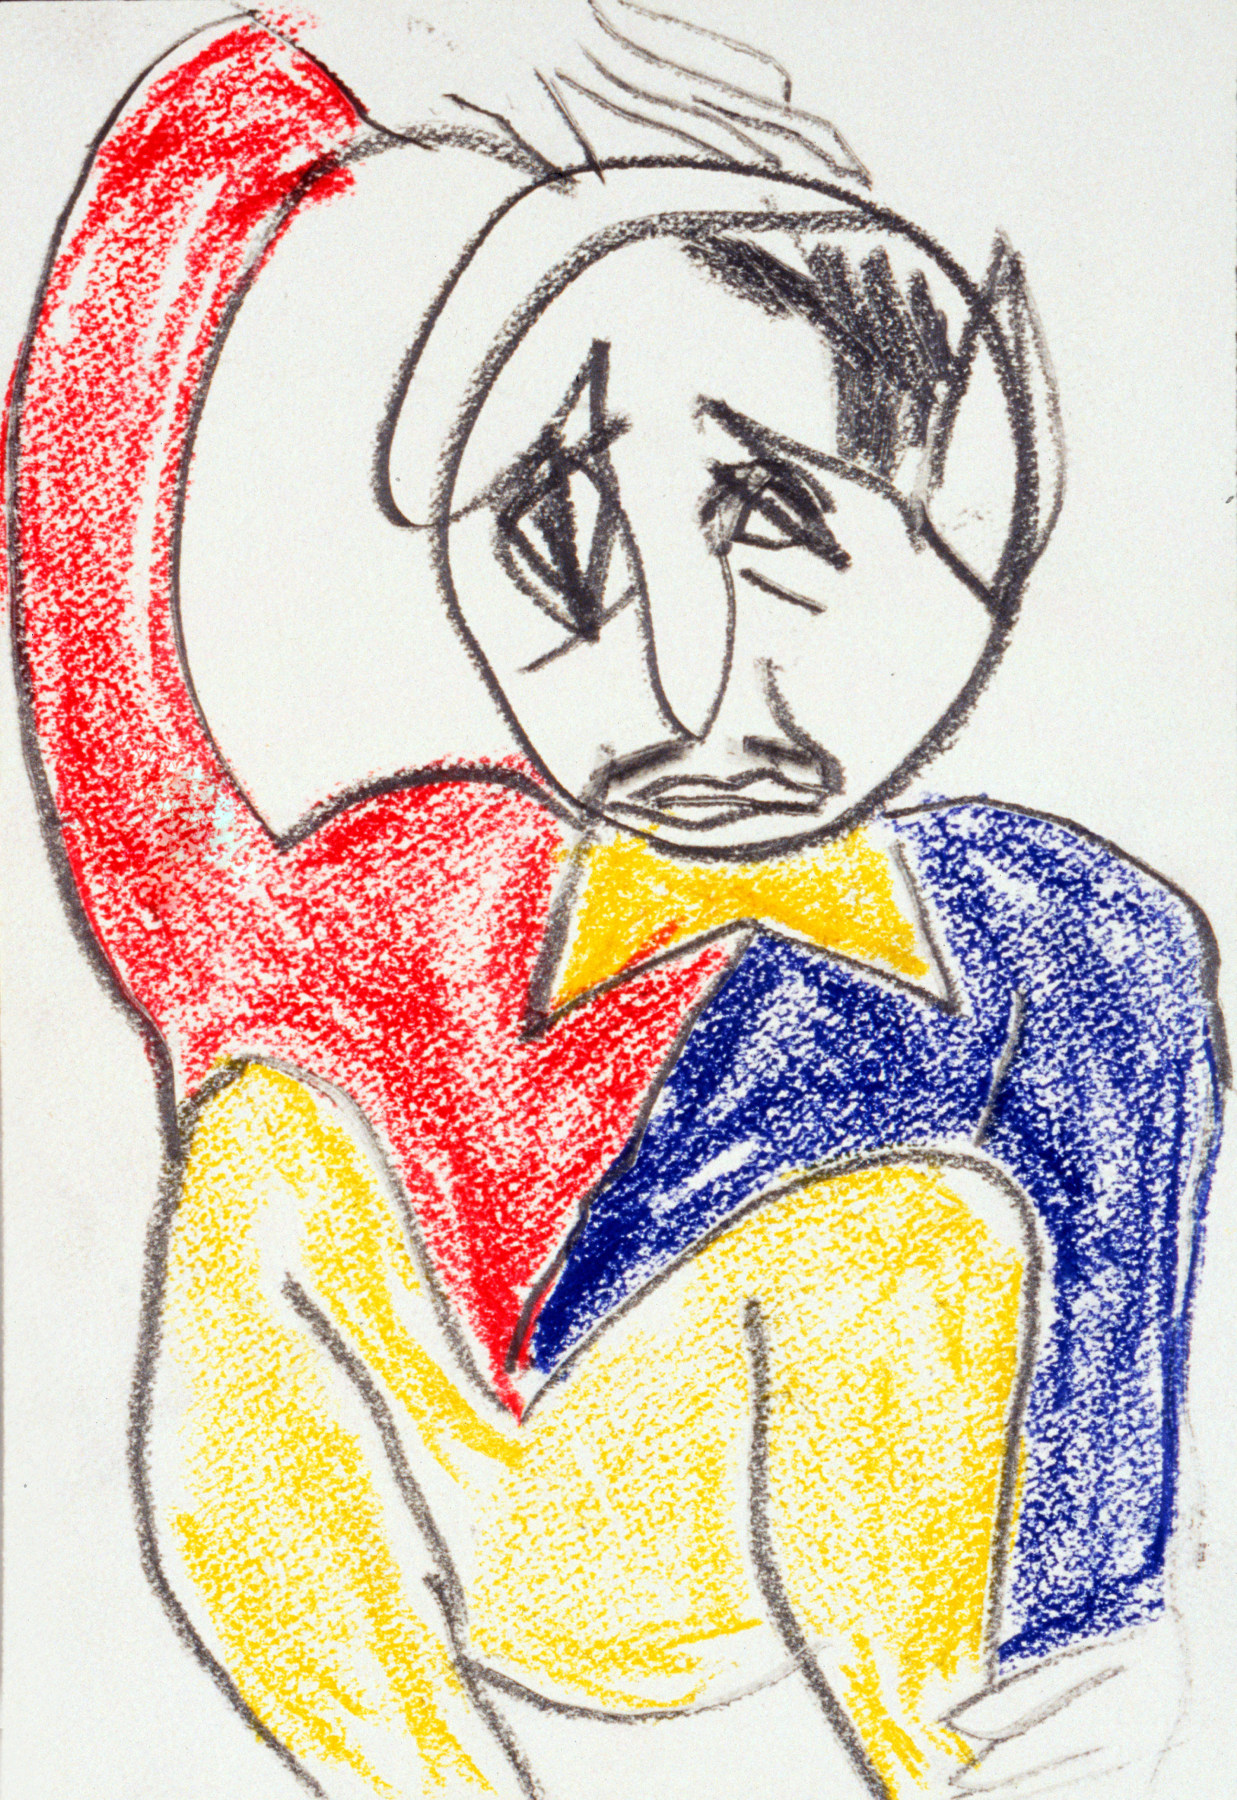 &quot;Untitled&quot;, 1985 Crayon, colored pencil on paper